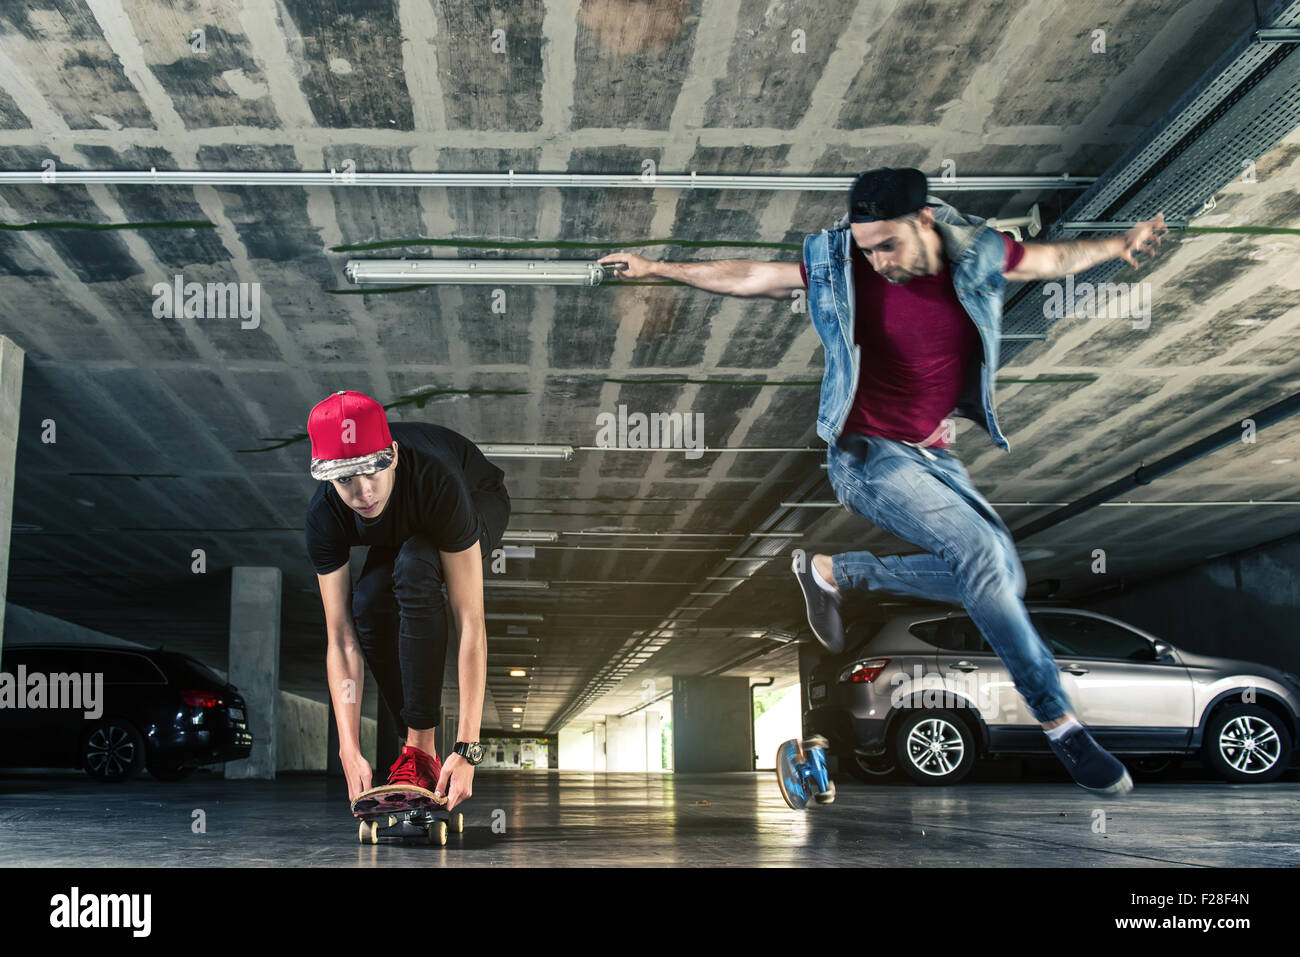 Professional skateboarder jumps in the subway Stock Photo